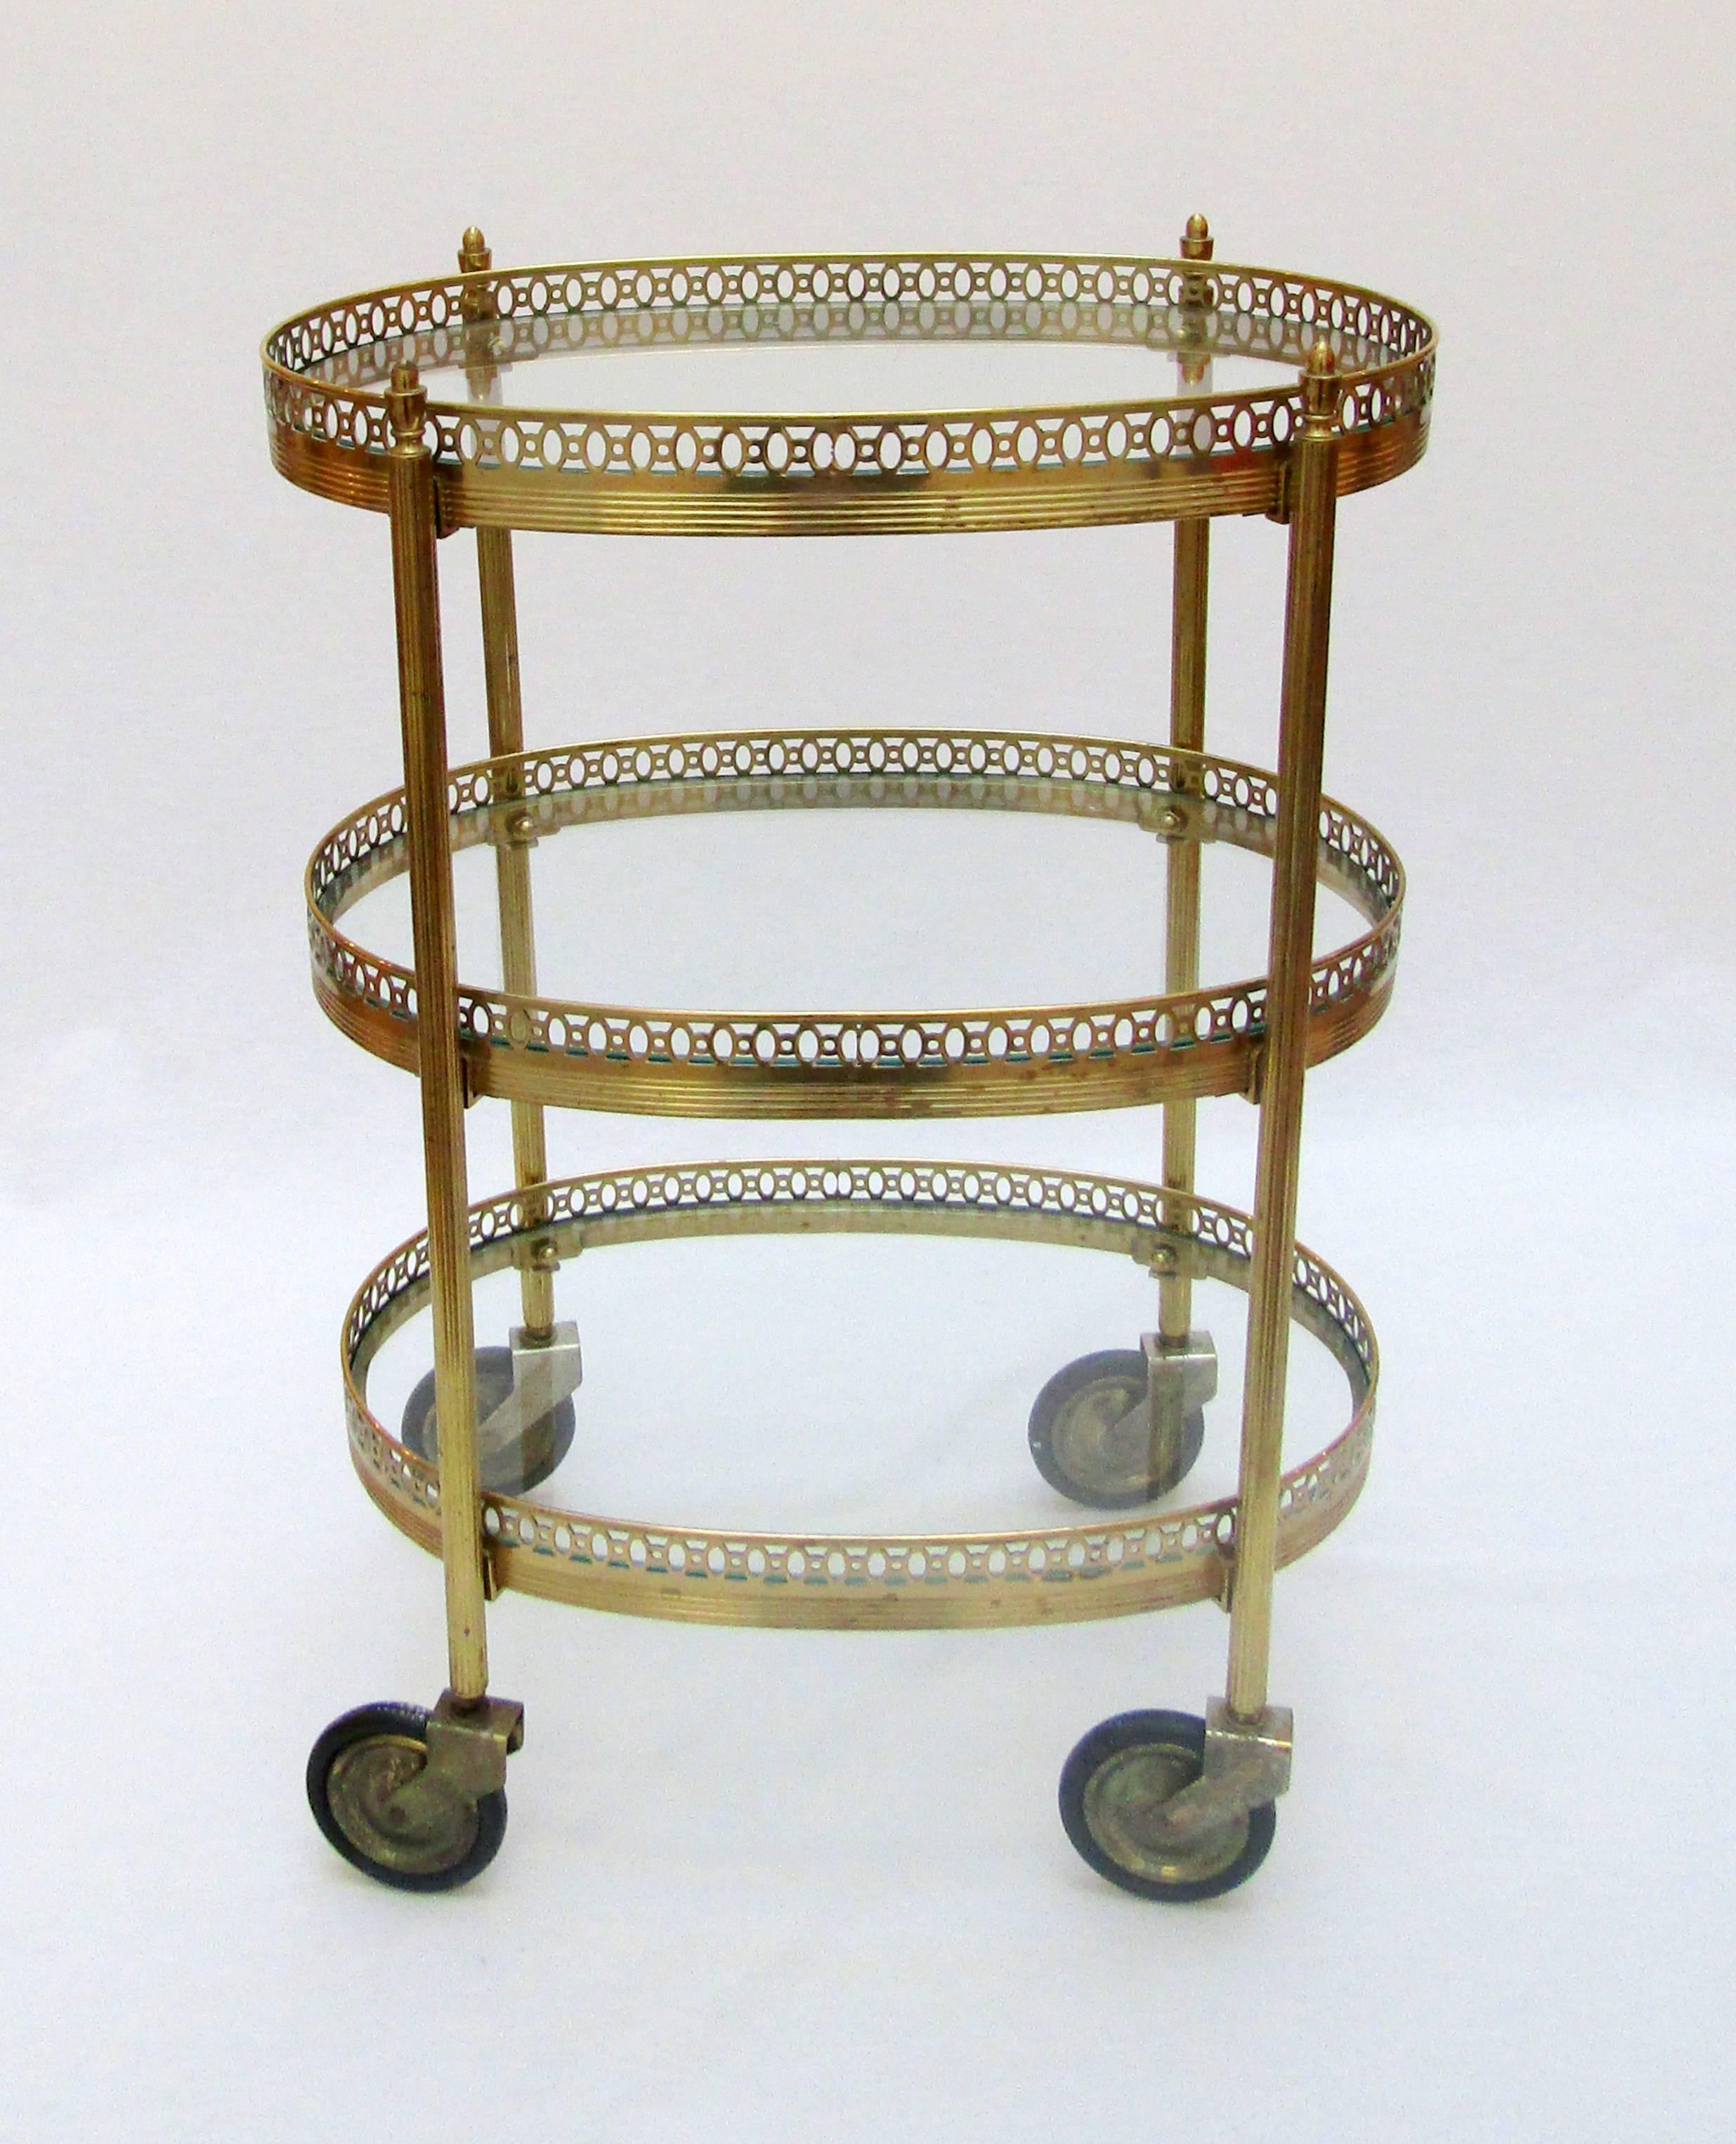 An oval three-tier brass and glass trolley.